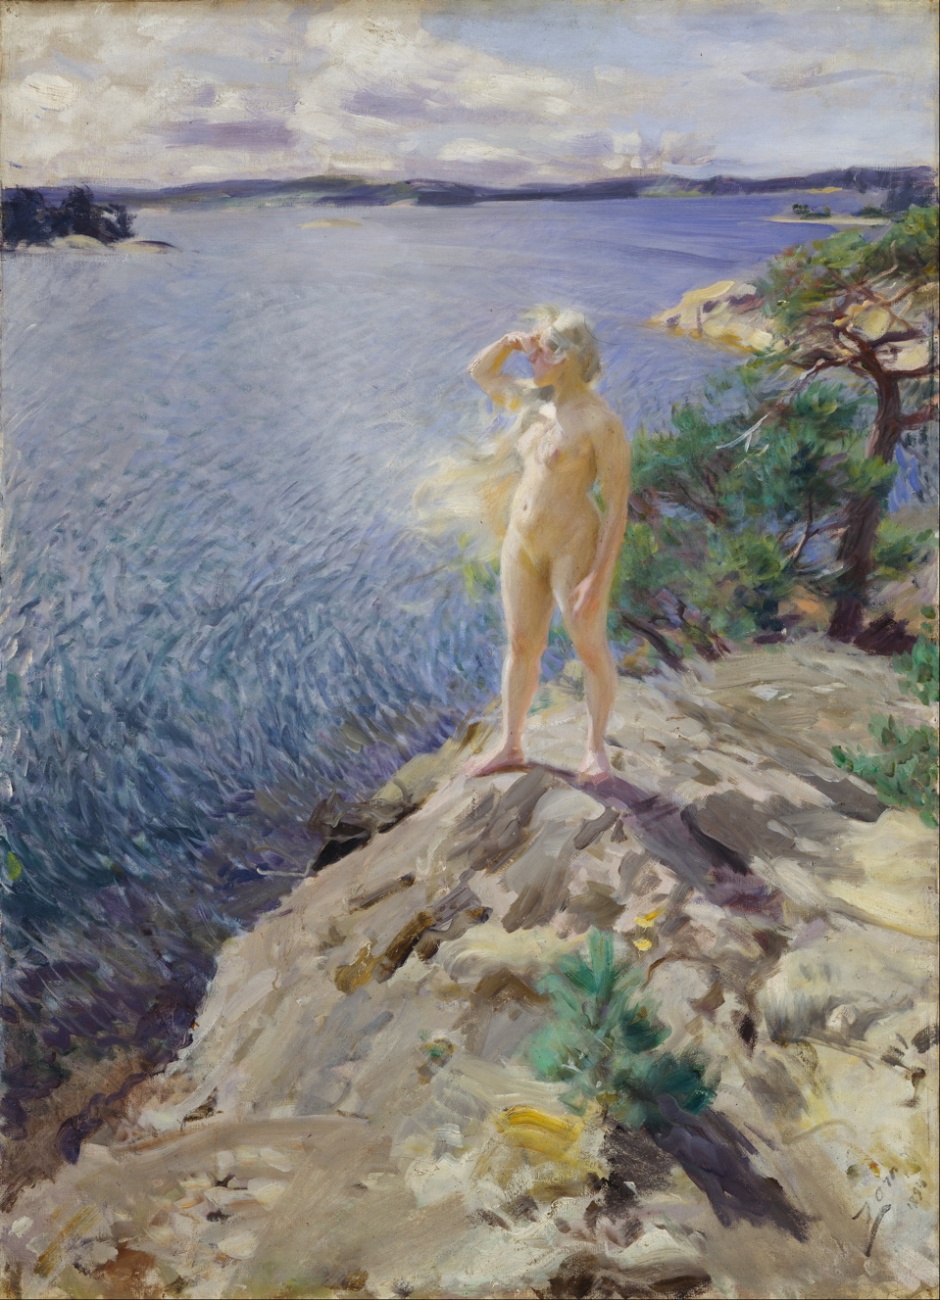 Anders Zorn, In the Skerries (1894), oil on canvas, 125.5 x 90.5 cm, Nationalgalleriet, Oslo. Wikimedia Commons.